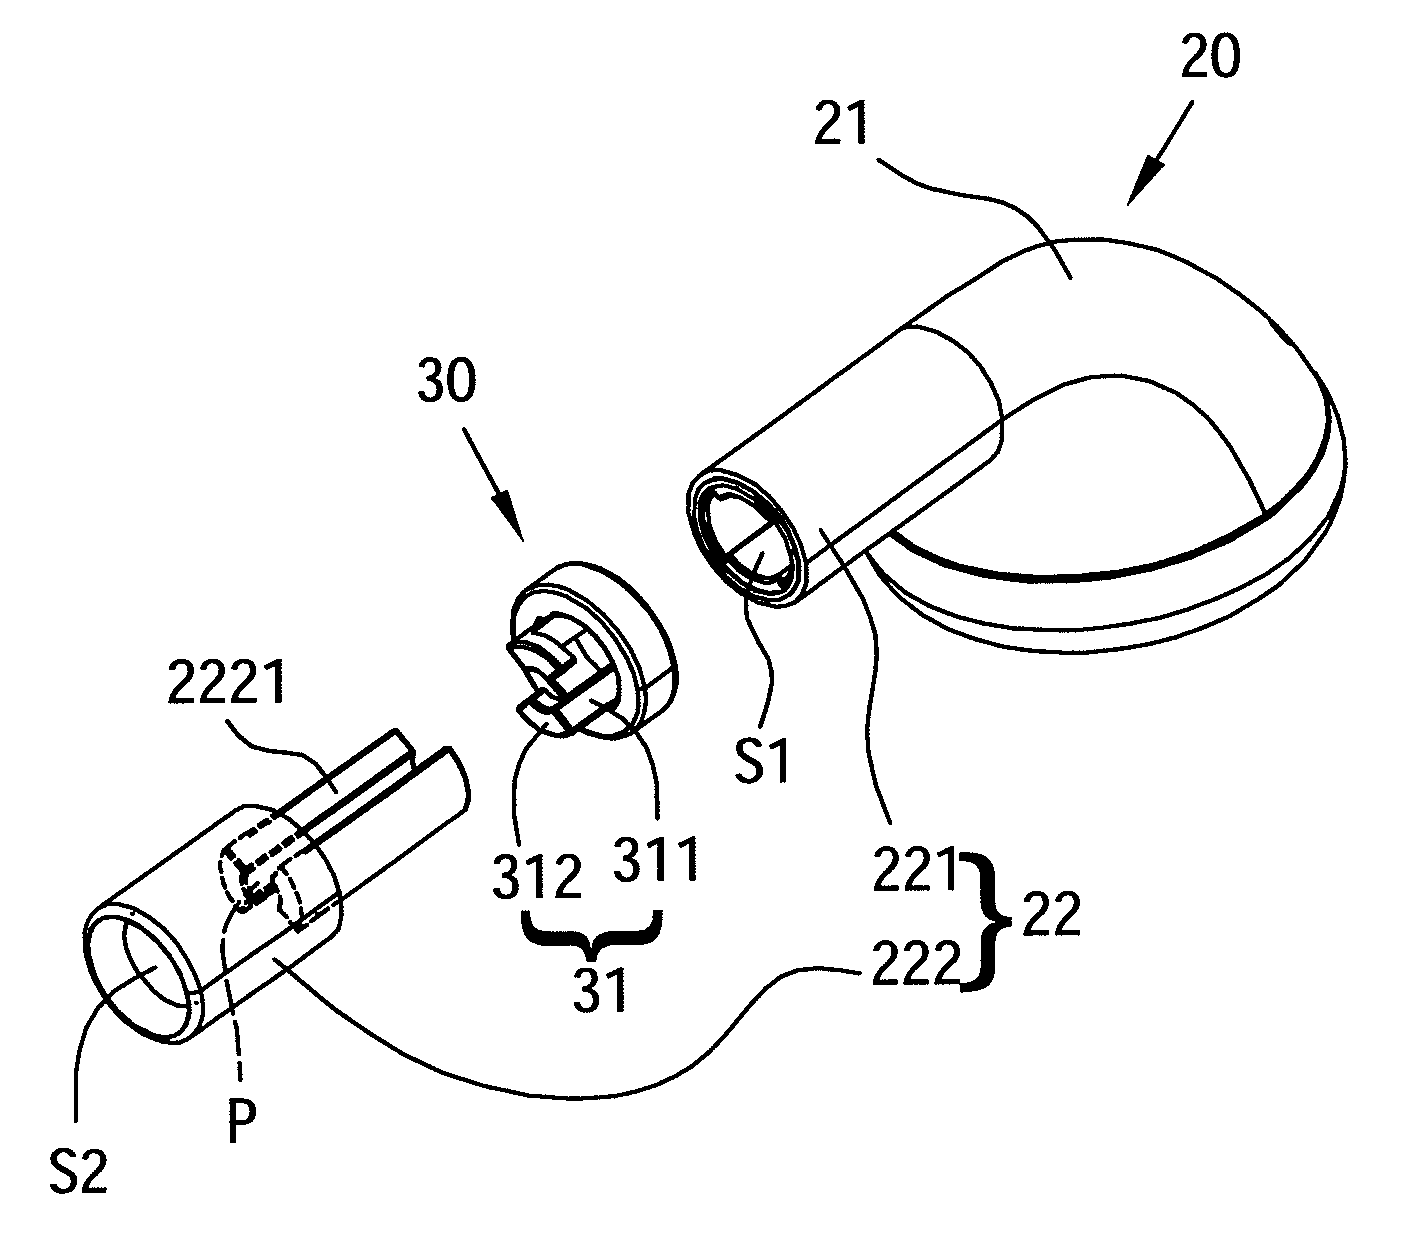 Earphone device with bass adjusting function